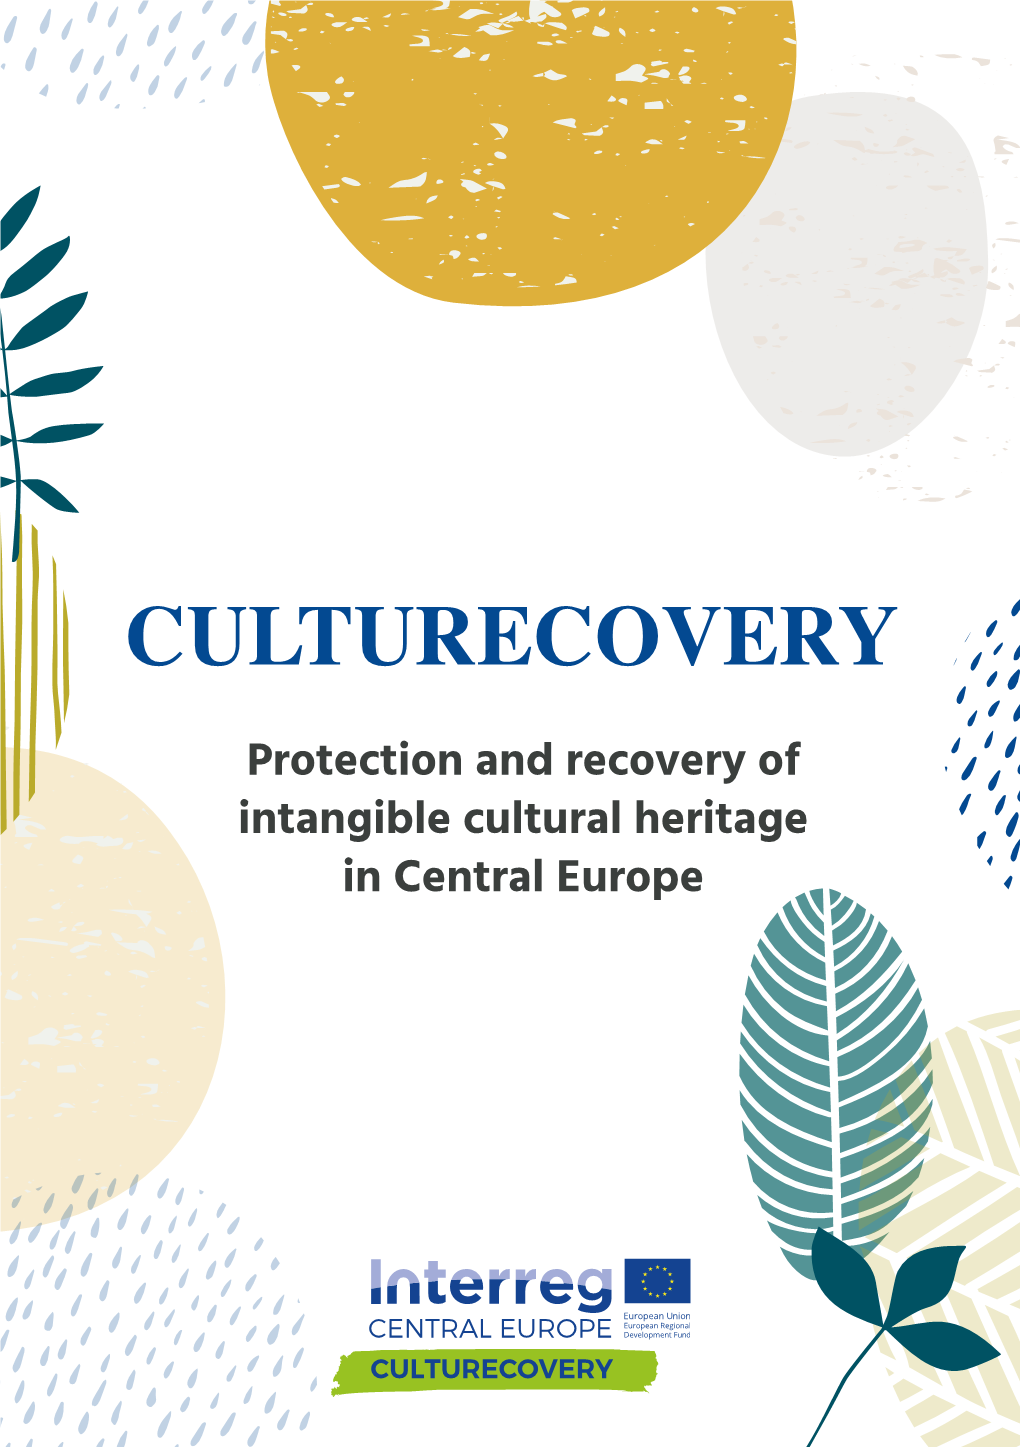 Culturecovery